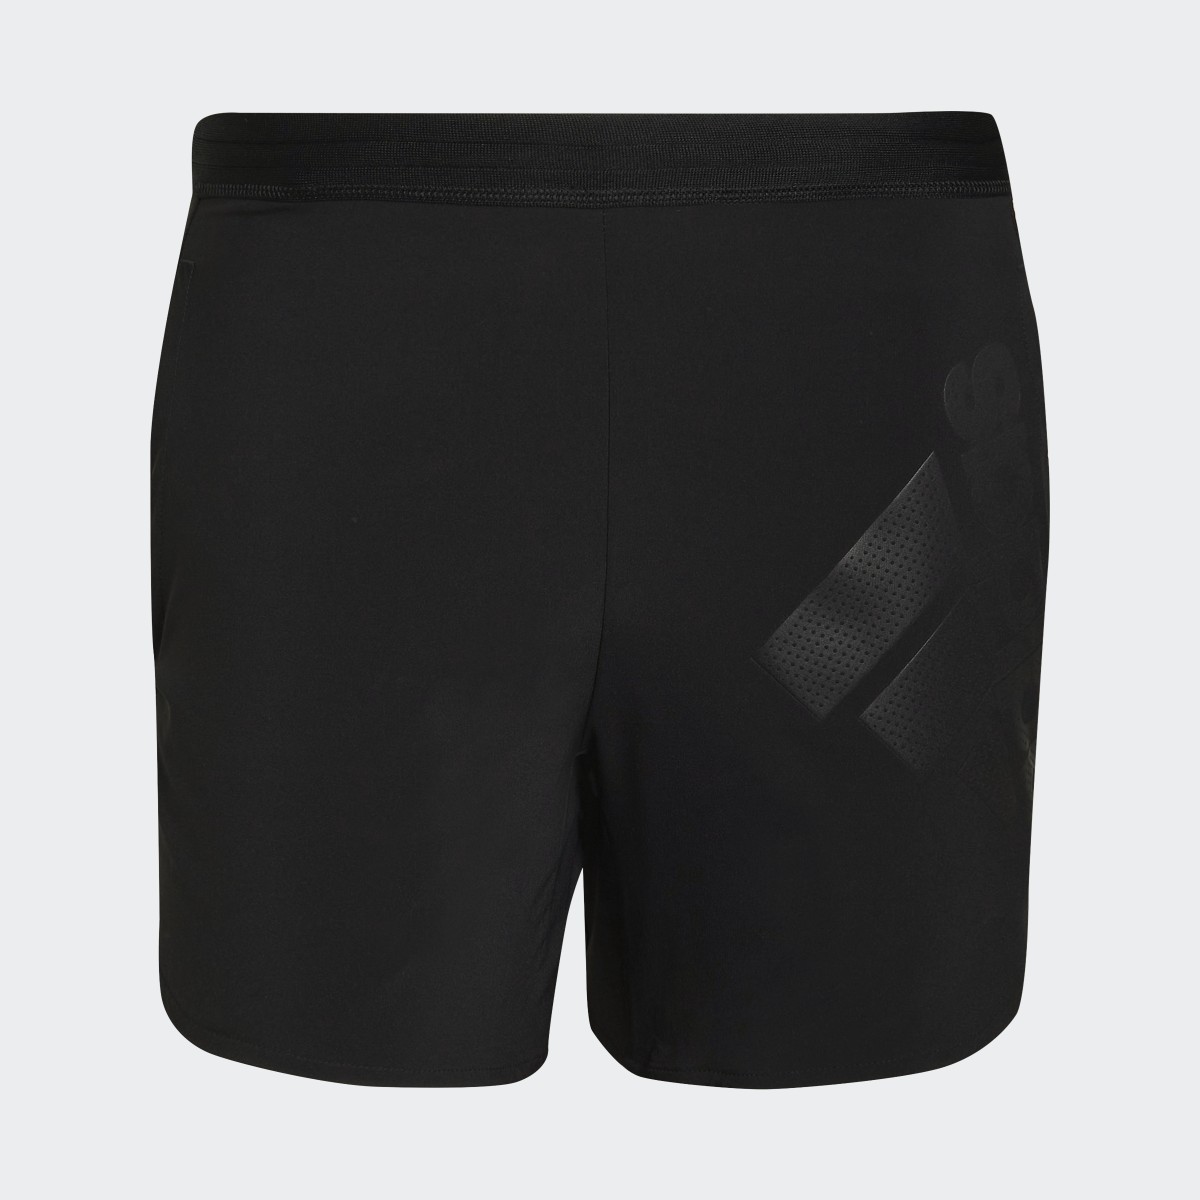 Adidas Made To Be Remade Training Shorts. 8